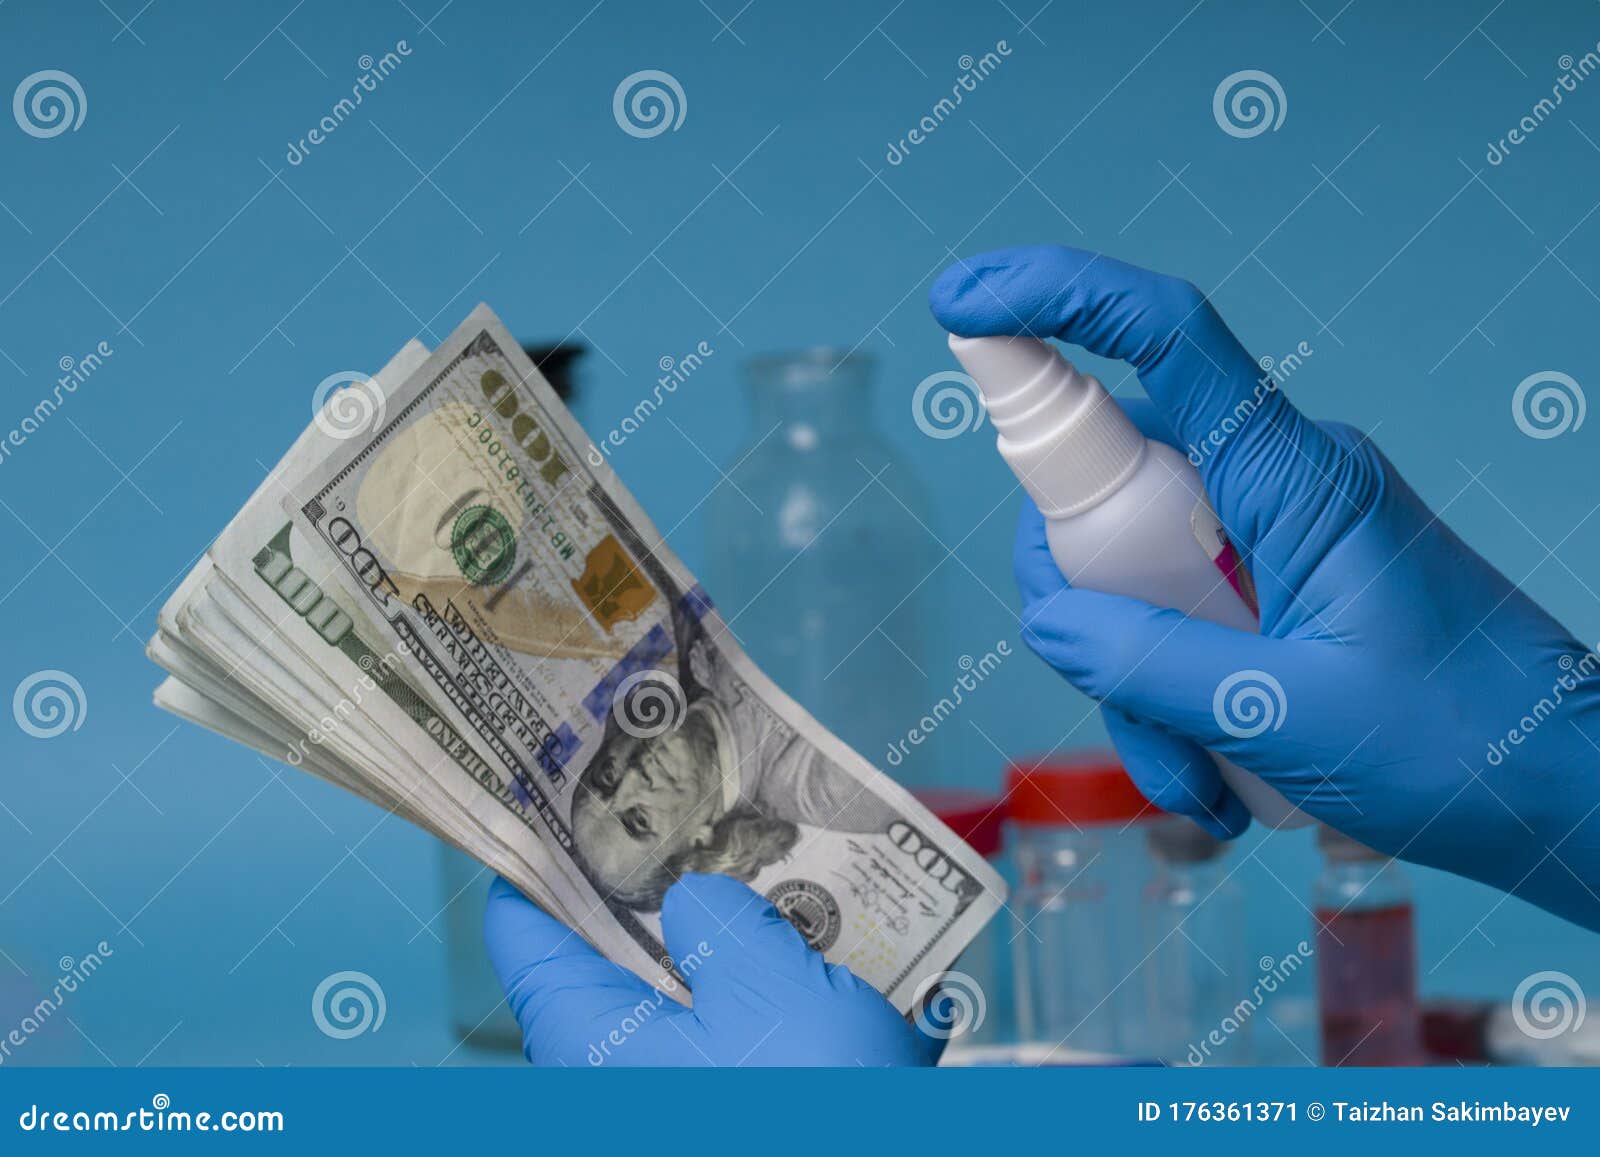 disinfecting banknotes to stop spread of coronavirus. sterilize dollar banknotes